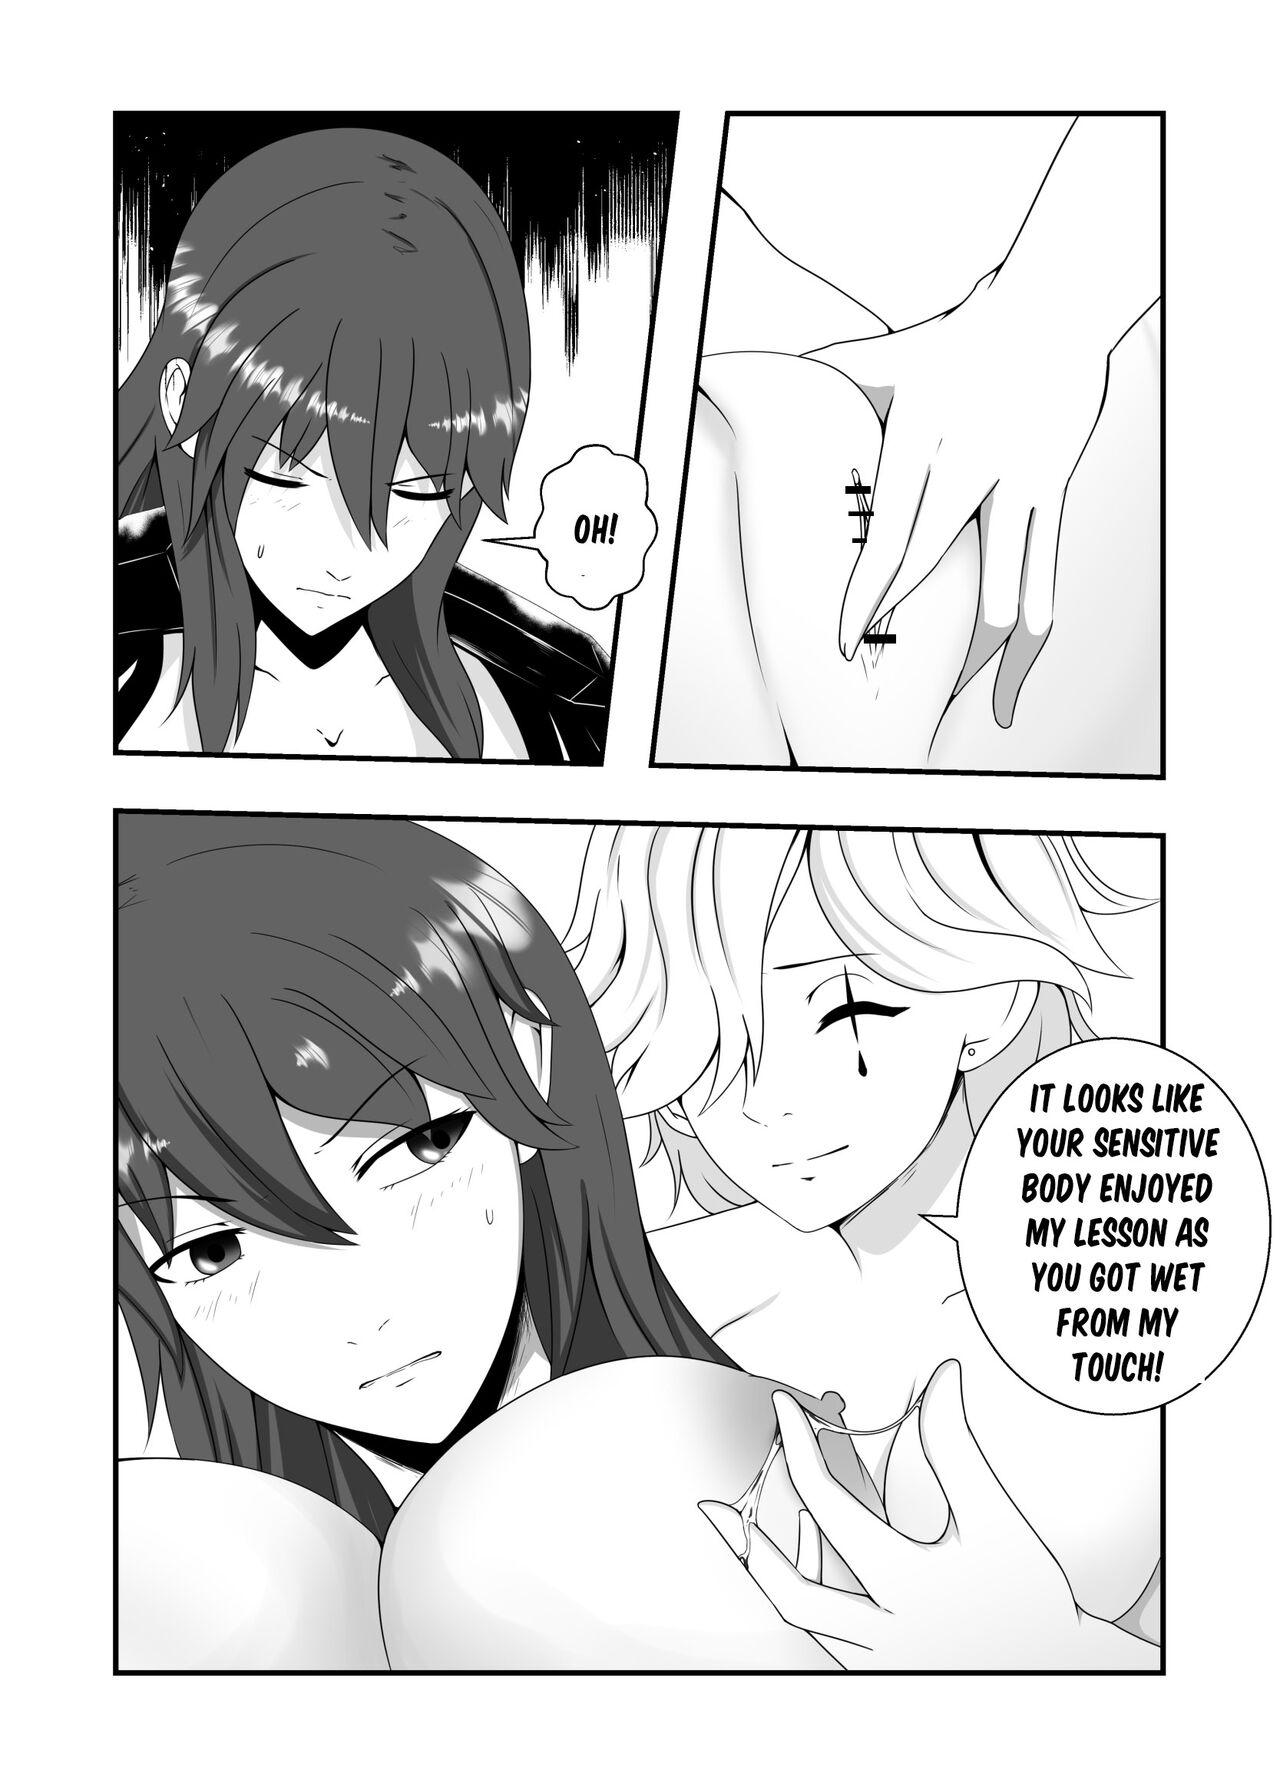 Lesbian Porn Fire Emblem Three Houses - Forced Conception of Byleth - Fire emblem three houses Heels - Page 12